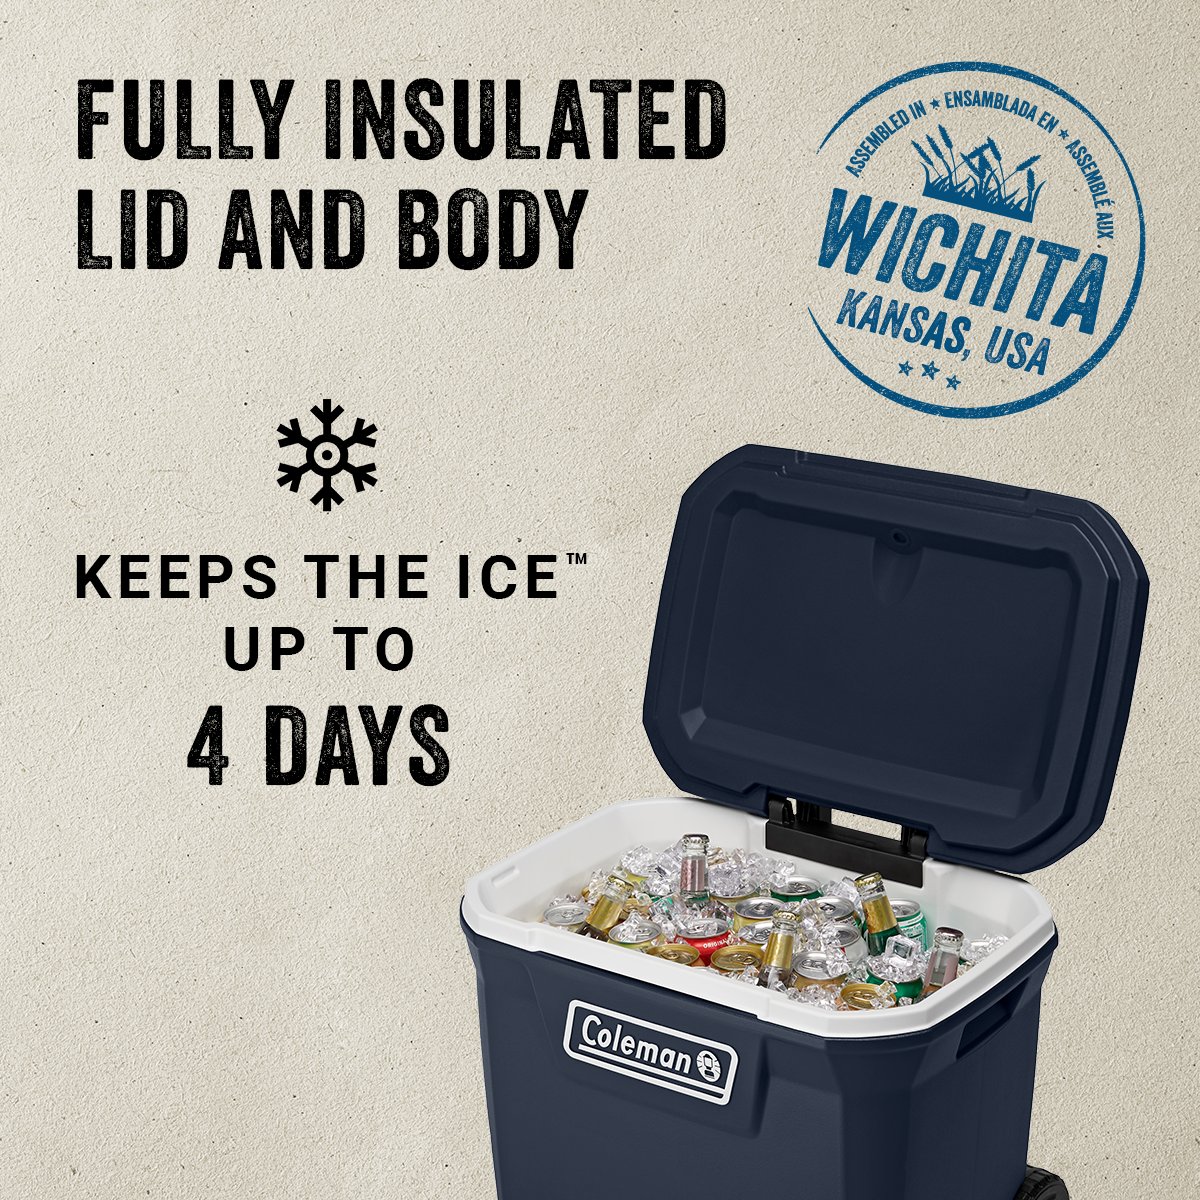 Coleman 316 Series 50 QT Wheeled Cooler, Blue Nights - image 2 of 7